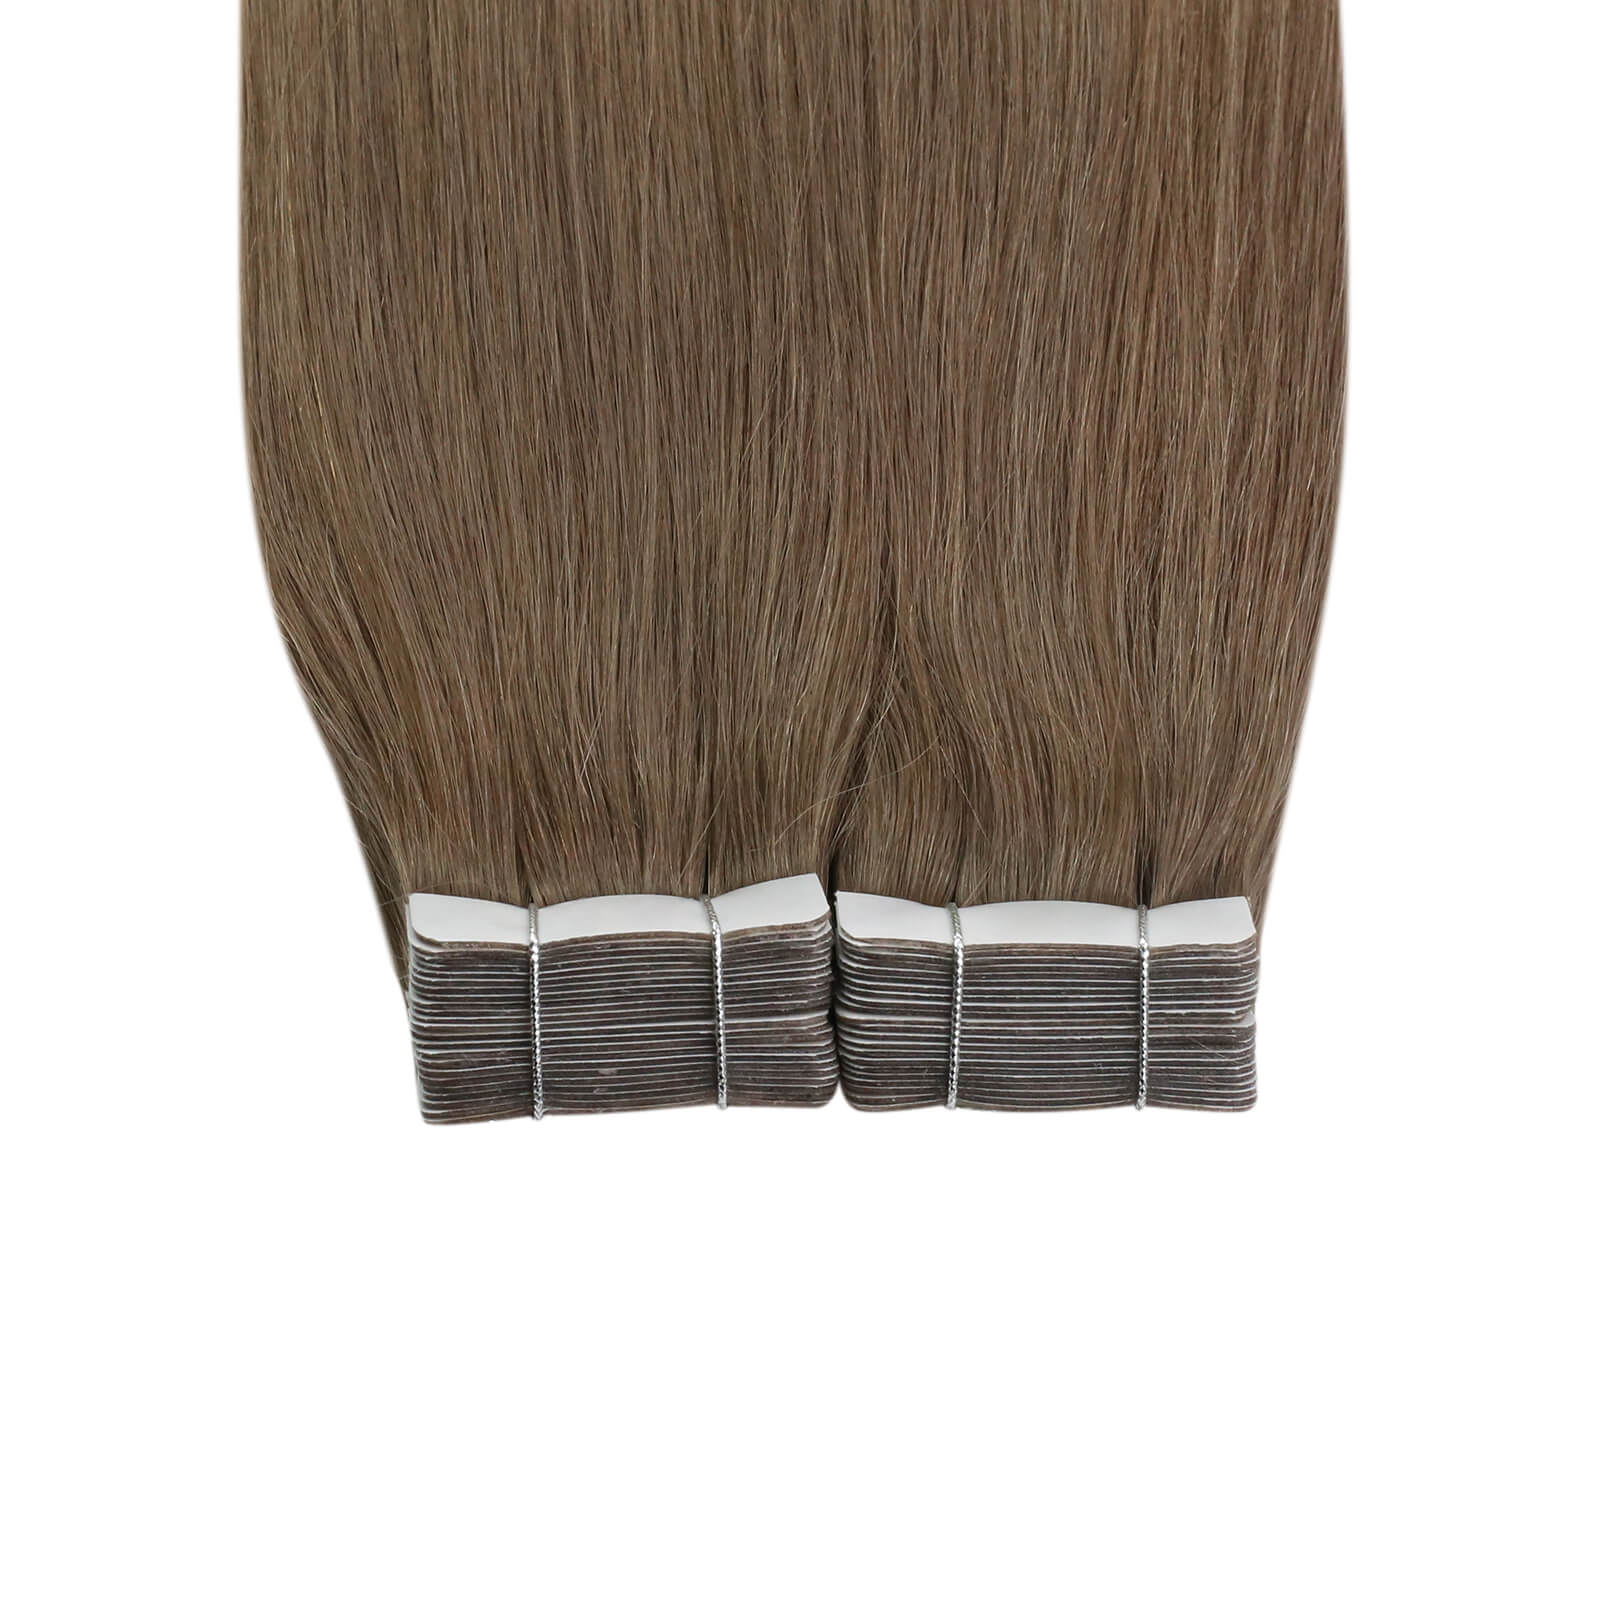 sunny hair extensions，tape in hair extensions placement tape in extensions on black hair tape in hair extensions cheap remy tape in hair extensions